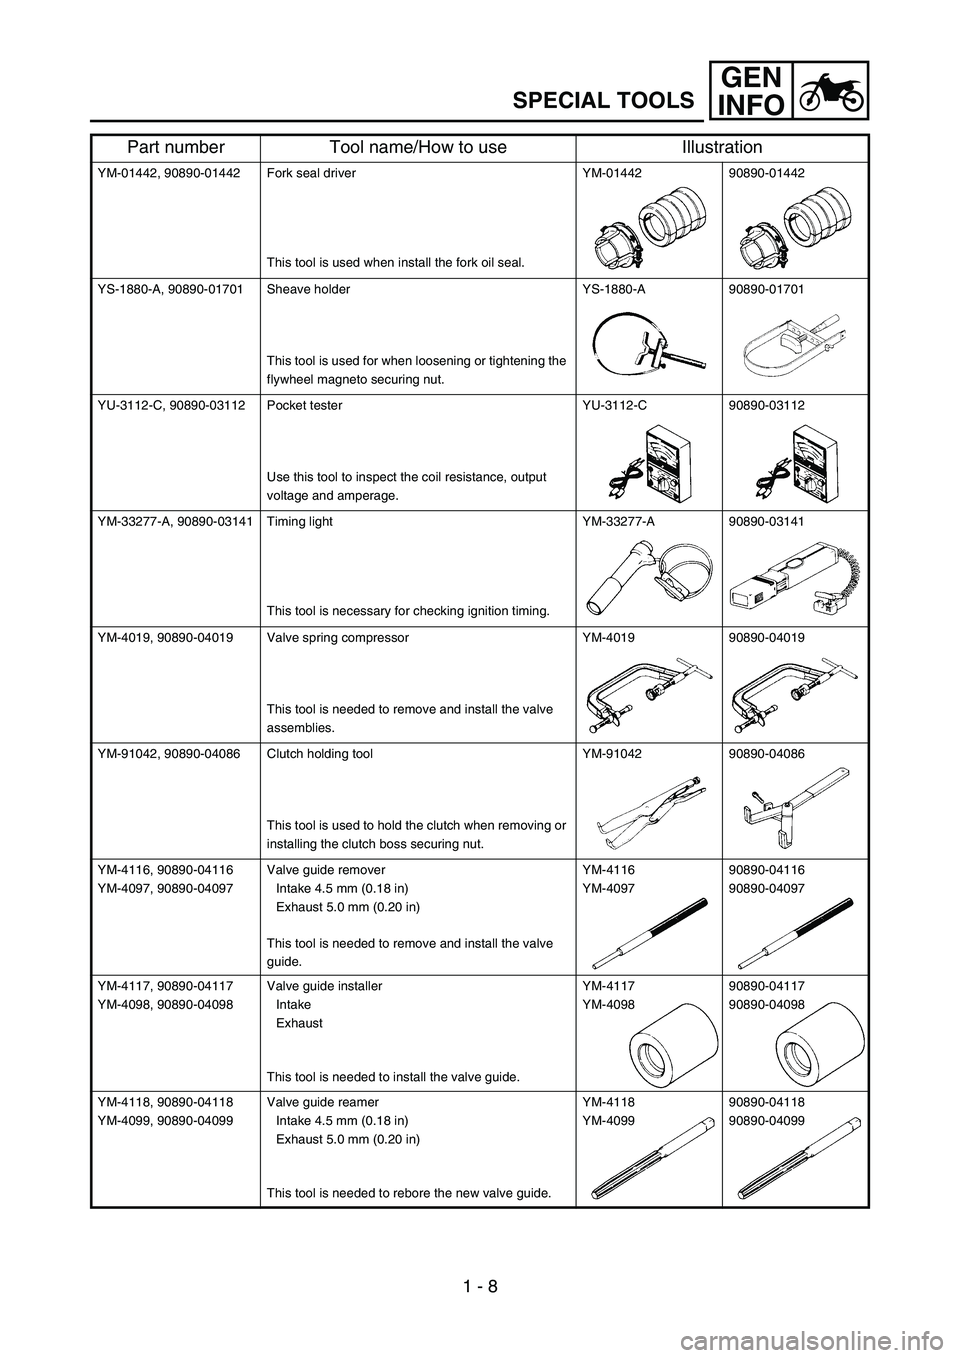 YAMAHA WR 450F 2005  Betriebsanleitungen (in German) GEN
INFO
1 - 8
SPECIAL TOOLS
YM-01442, 90890-01442 Fork seal driver
This tool is used when install the fork oil seal.YM-01442 90890-01442
YS-1880-A, 90890-01701 Sheave holder
This tool is used for whe